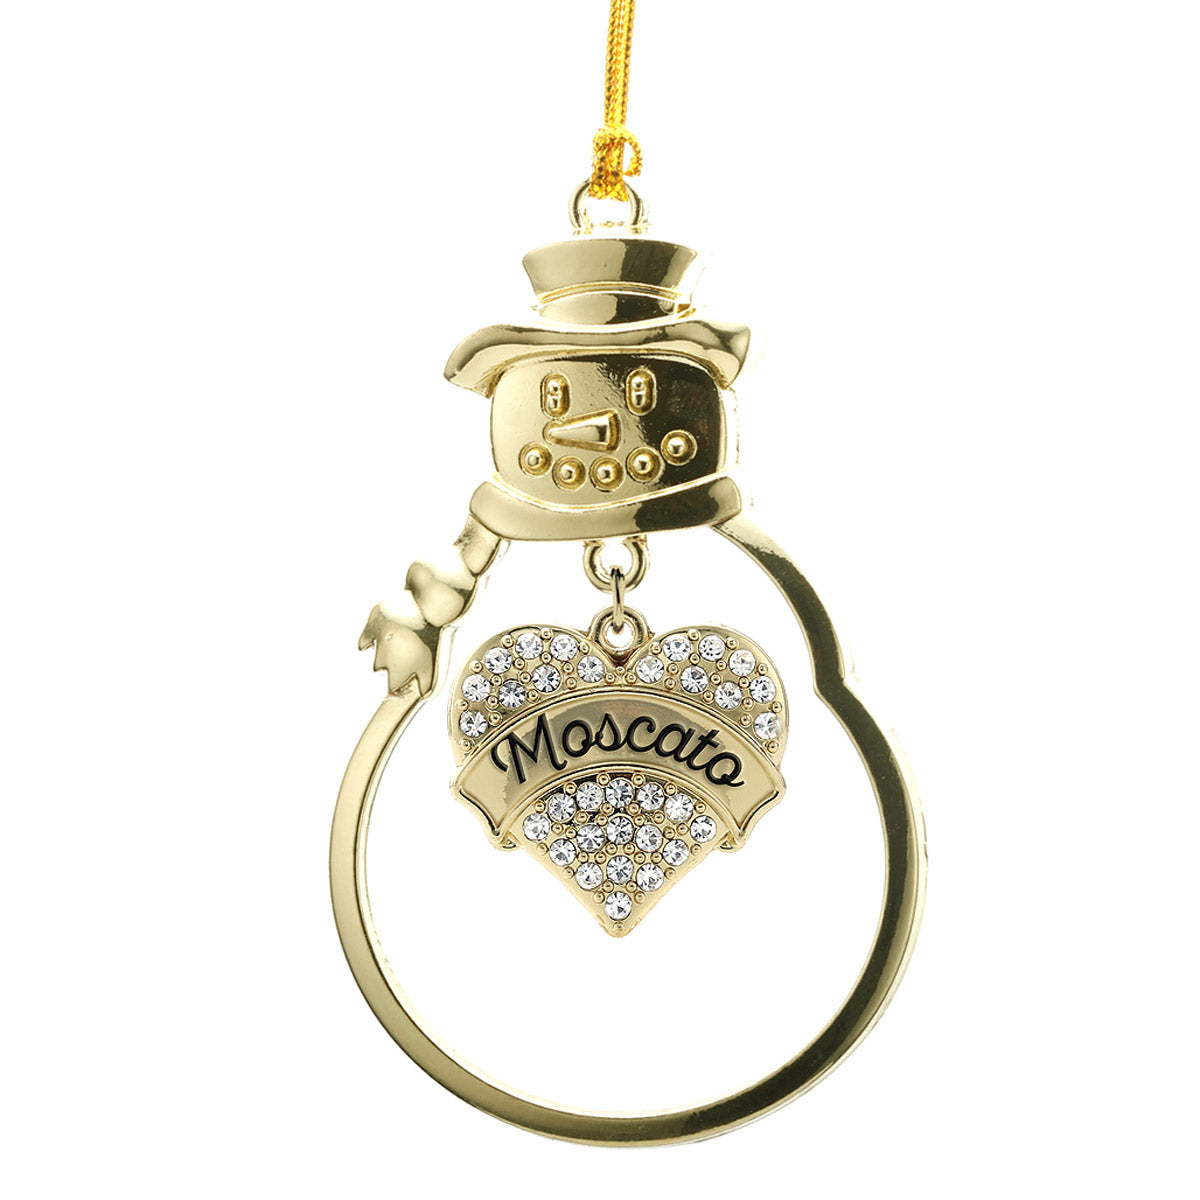 Gold Moscato Pave Heart Charm Snowman Ornament